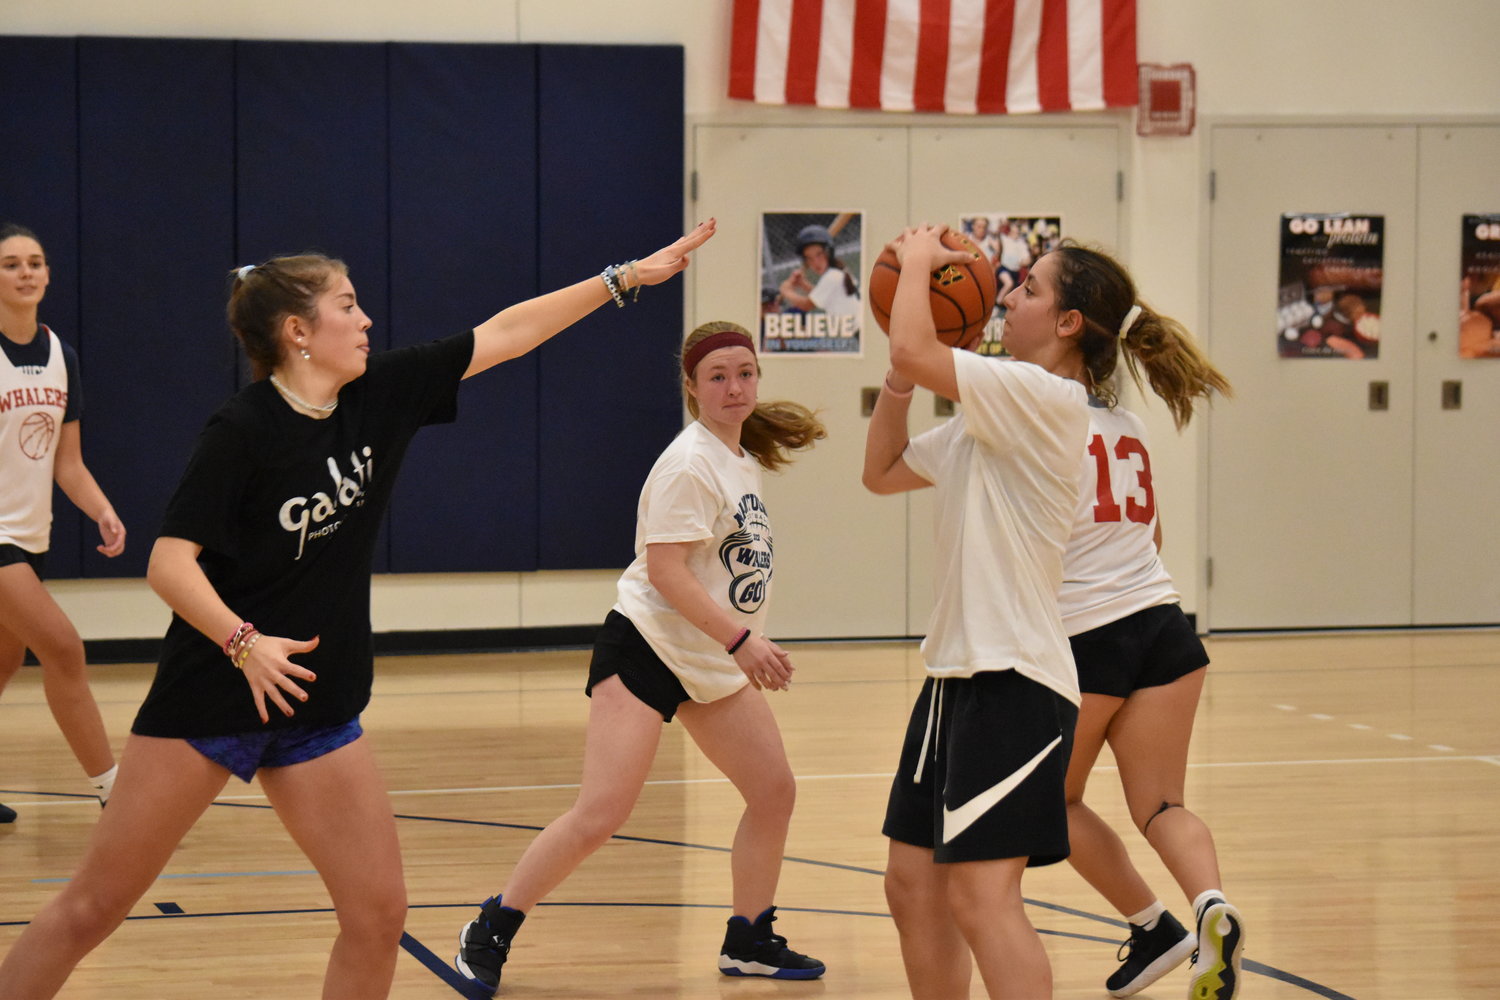 Adney Brannigan (left) defends a shot from Alana Ferriera-Ludvigson during practice on Monday.